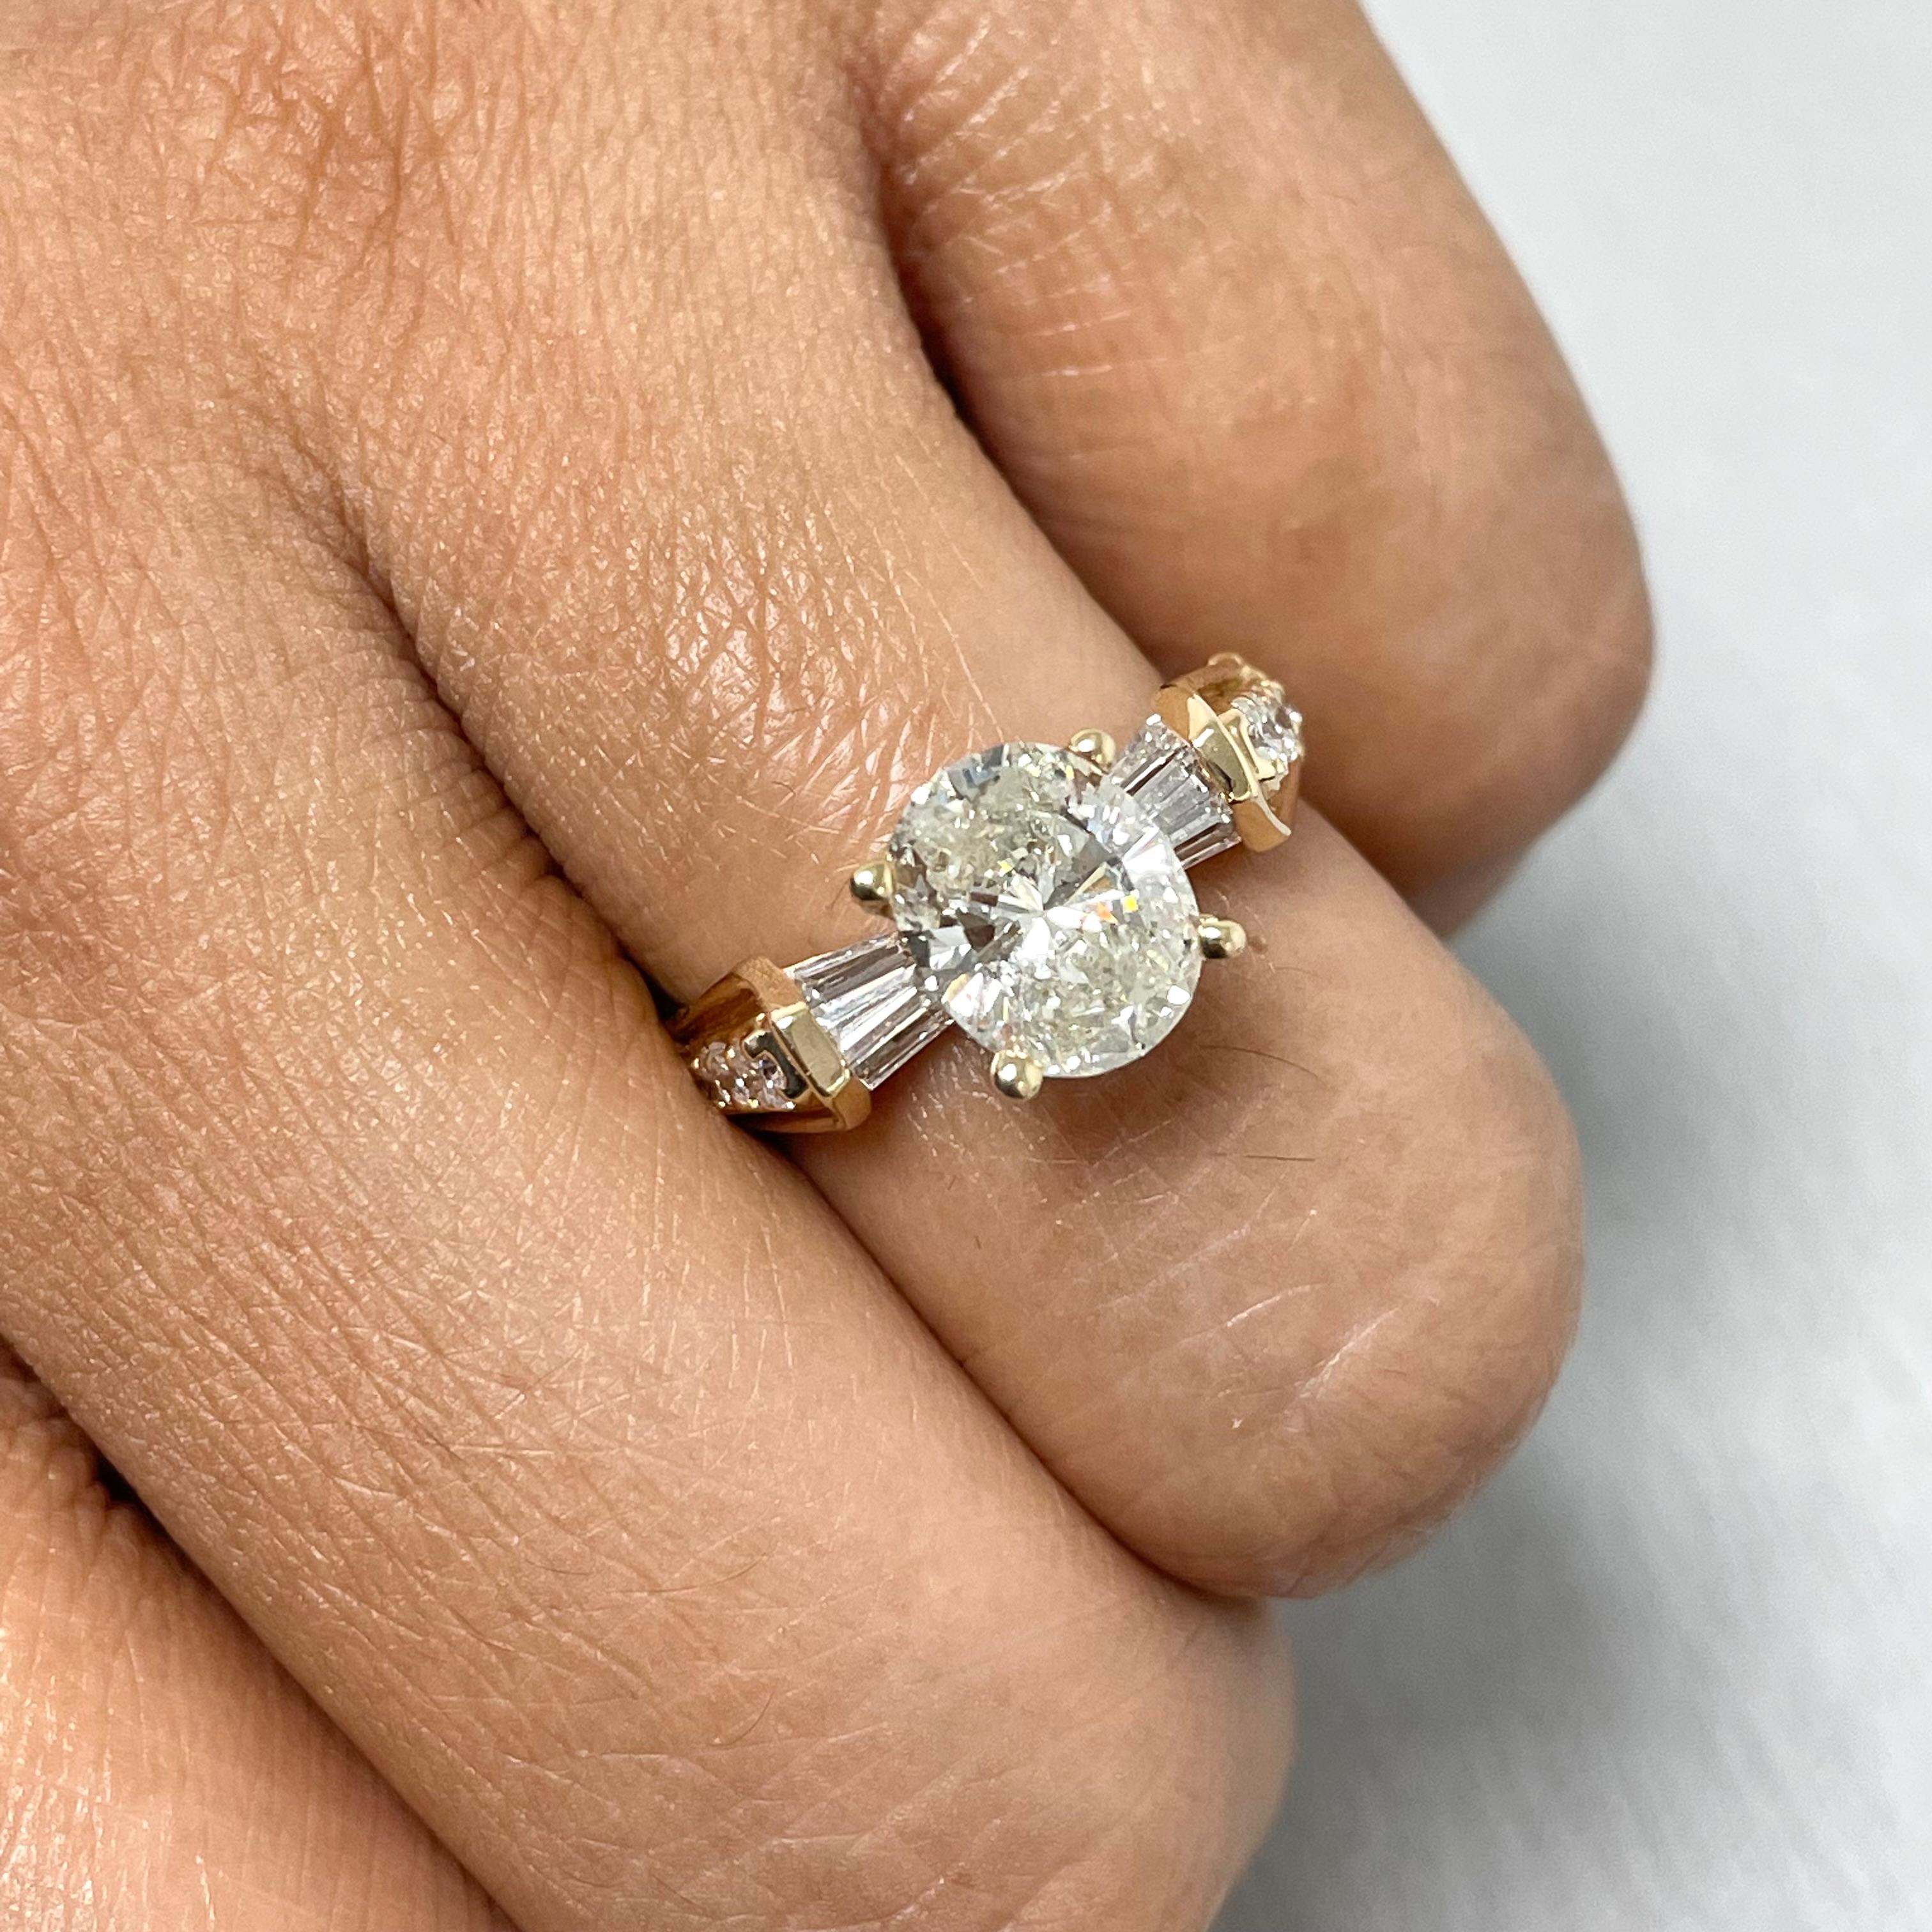 Chic and delicate, this Oval solitaire engagement rings features uniquely set baguette diamond accents spanning the face of the ring with round diamonds on the side shank.

Center Diamond Shape: Oval
Center Diamond Weight: 1.62 ct 
Diamond Color: J